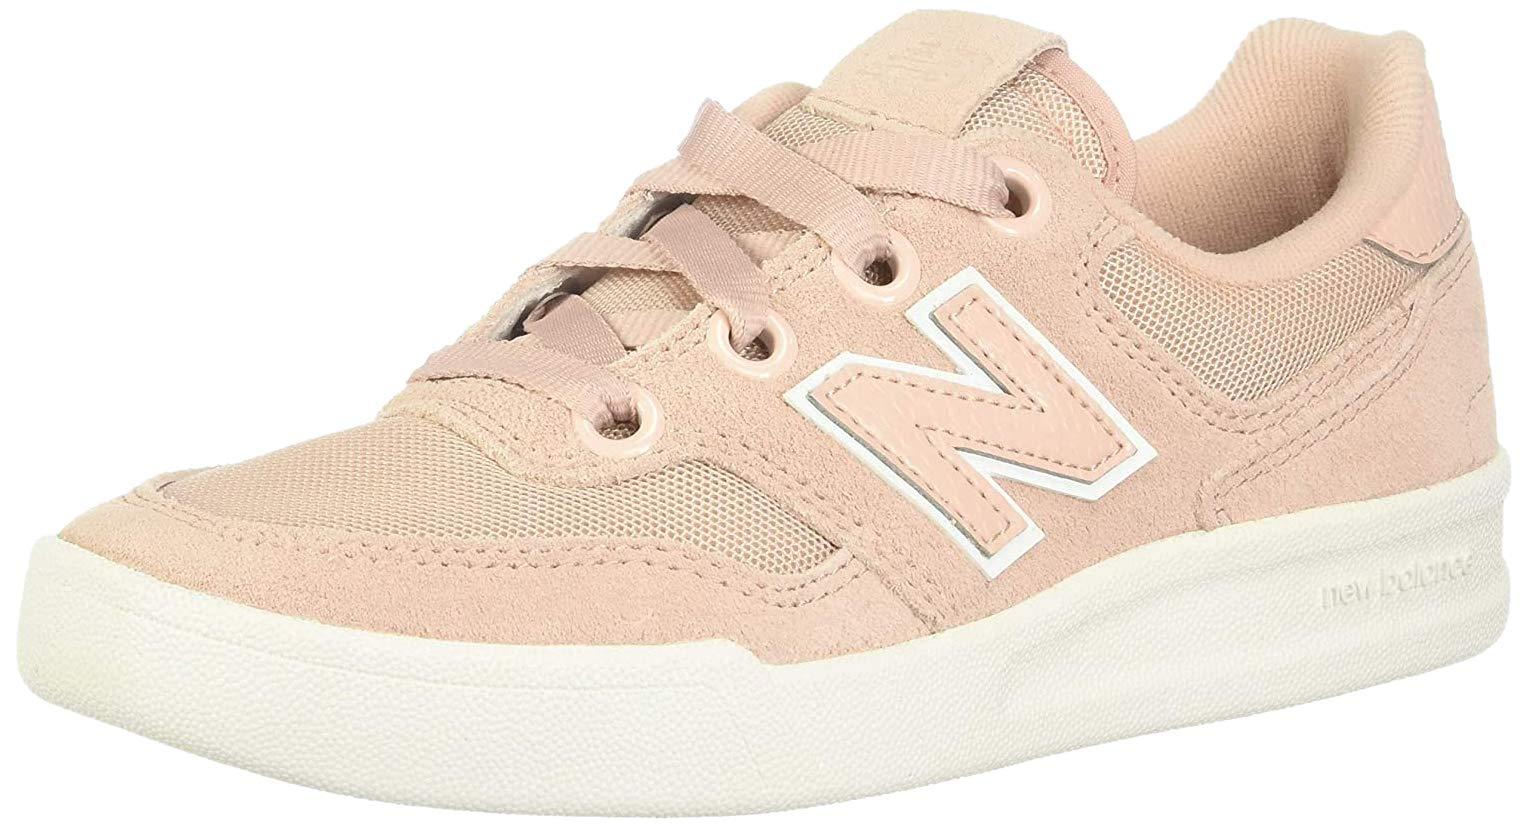 New Balance Suede 300 V2 Court Sneaker in Pink/White (Pink) - Save 53% |  Lyst